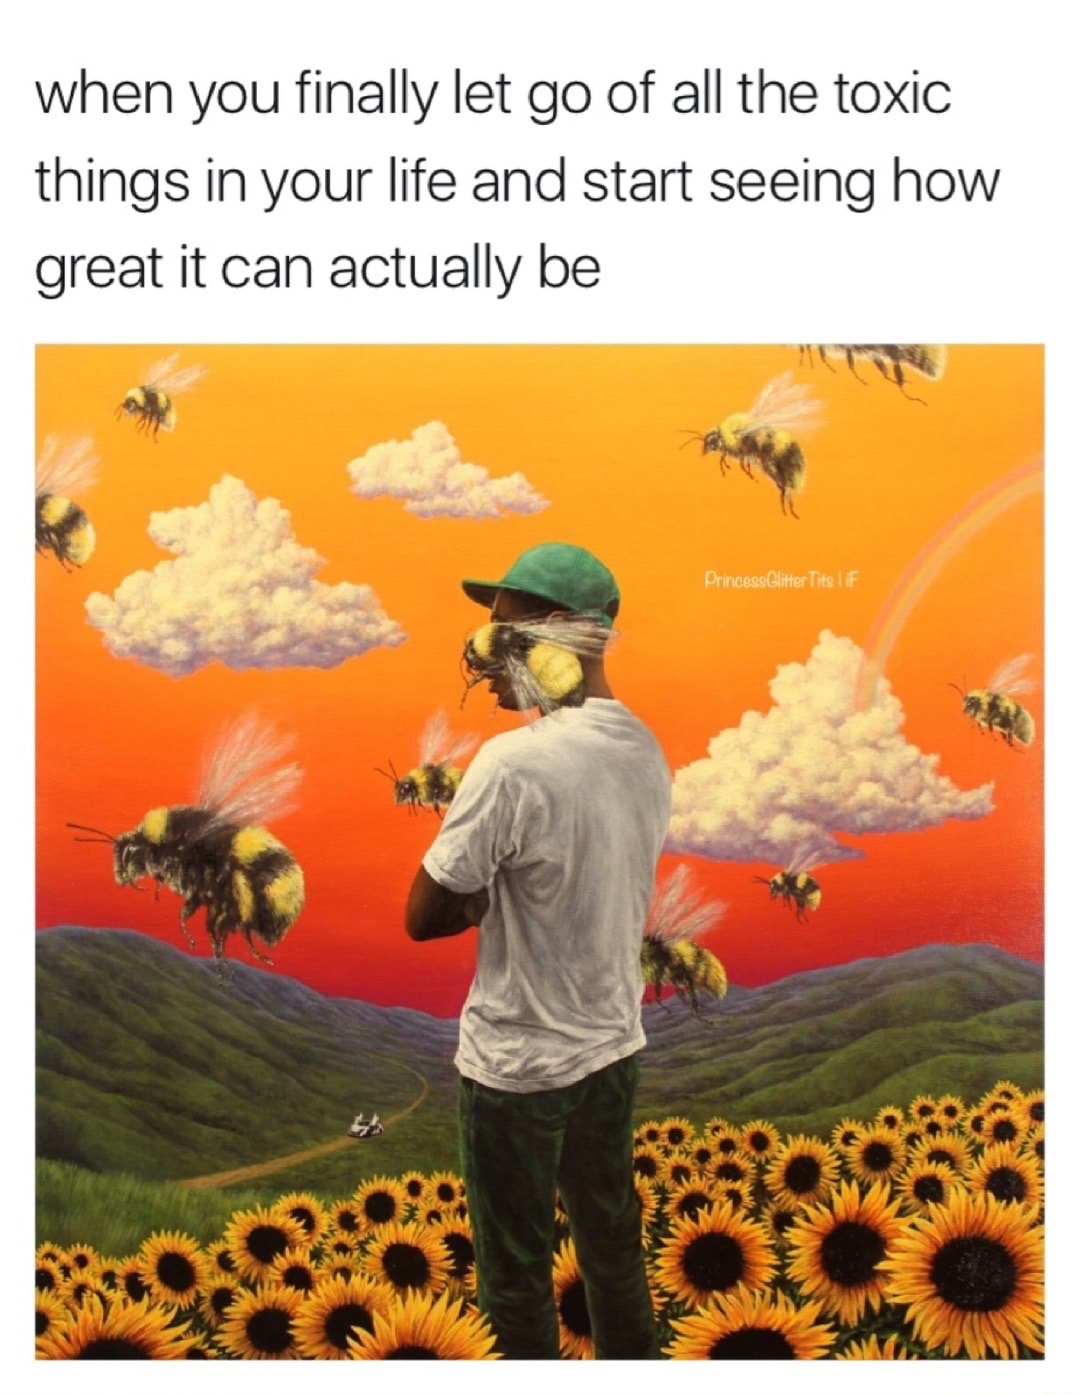 flower boy tyler the creator - when you finally let go of all the toxic things in your life and start seeing how great it can actually be PrincessGlitter Tits lif